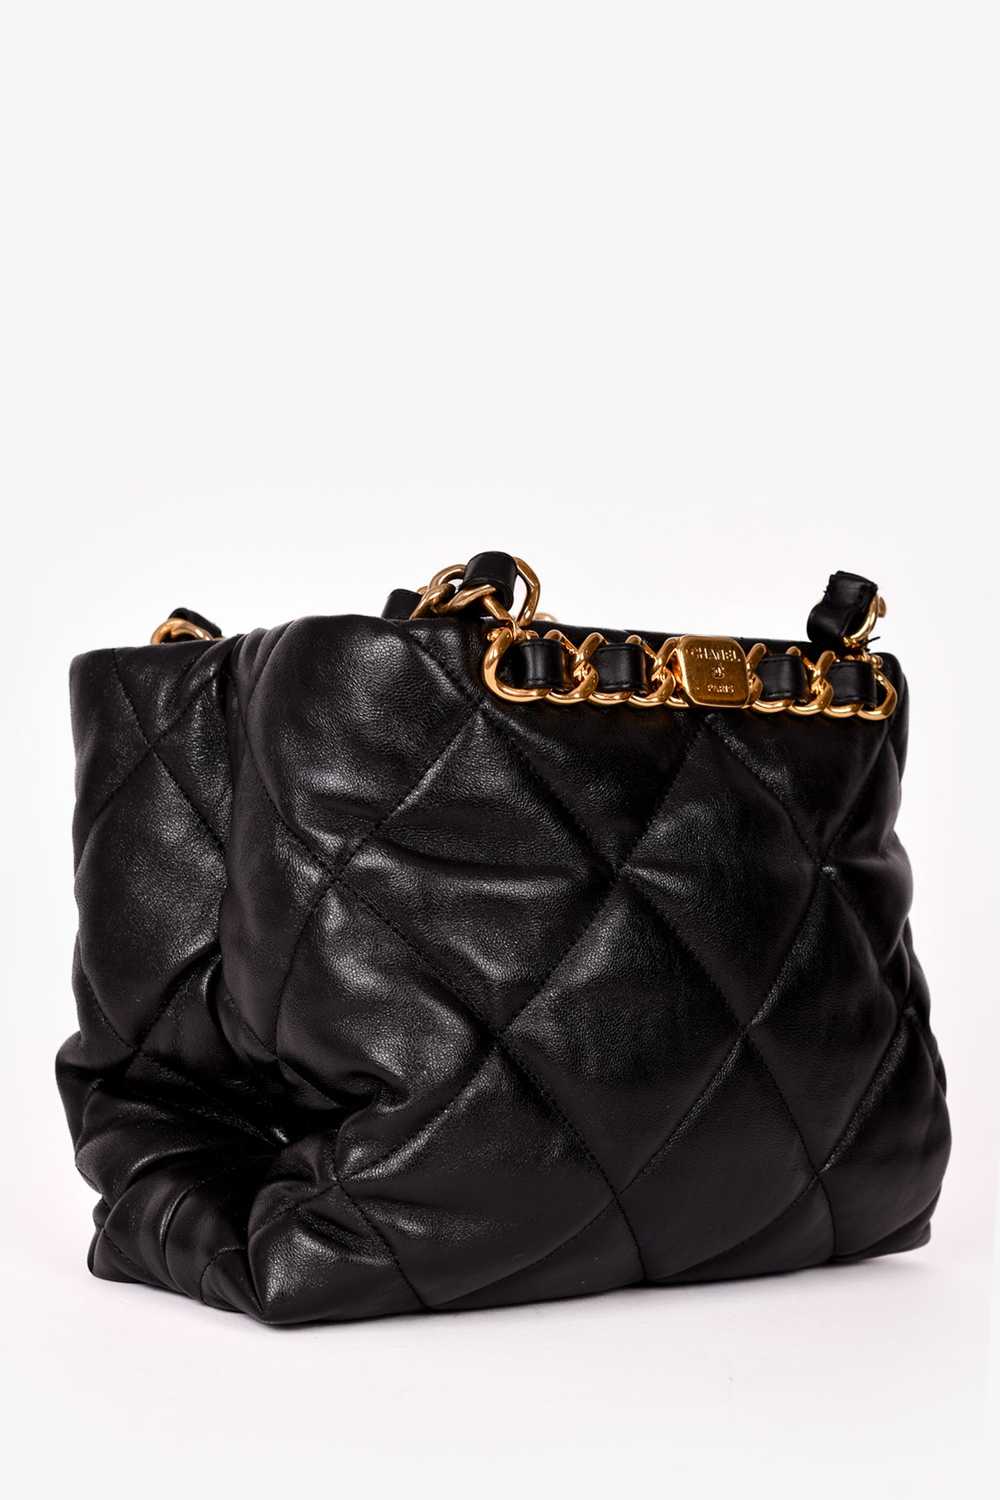 Pre-loved Chanel™ Black Lambskin Quilted Small Sh… - image 7